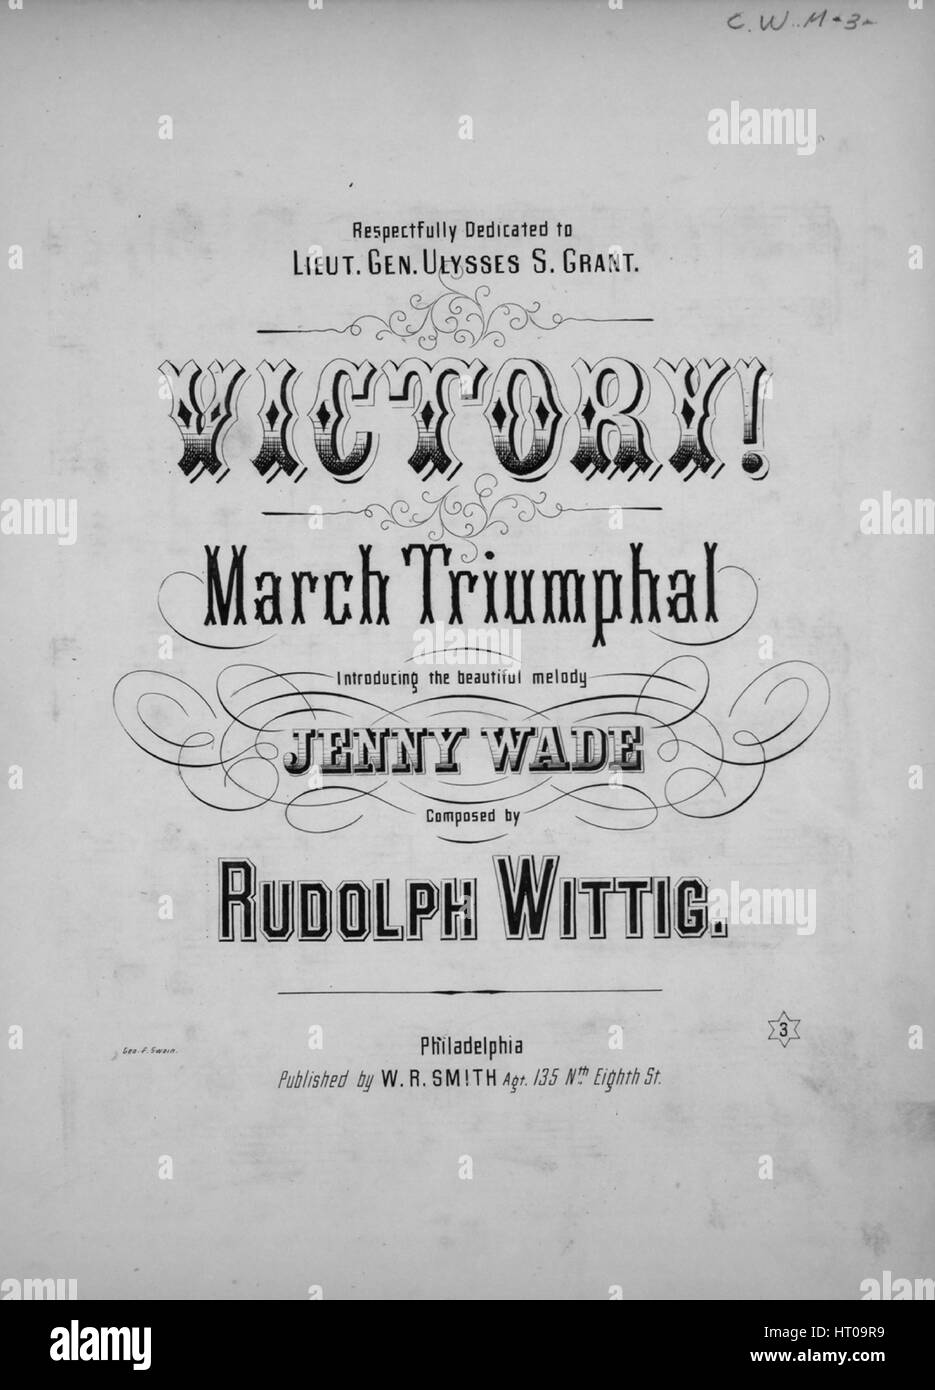 Sheet music cover image of the song 'Victory! March Triumphal Introducing the beautiful melody Jenny Wade', with original authorship notes reading 'Composed by Rudolph Wittig', United States, 1864. The publisher is listed as 'W.R. Smith, Agt., 135 Nth. Eighth St.', the form of composition is 'da capo', the instrumentation is 'piano', the first line reads 'None', and the illustration artist is listed as 'Geo. F. Swain.'. Stock Photo